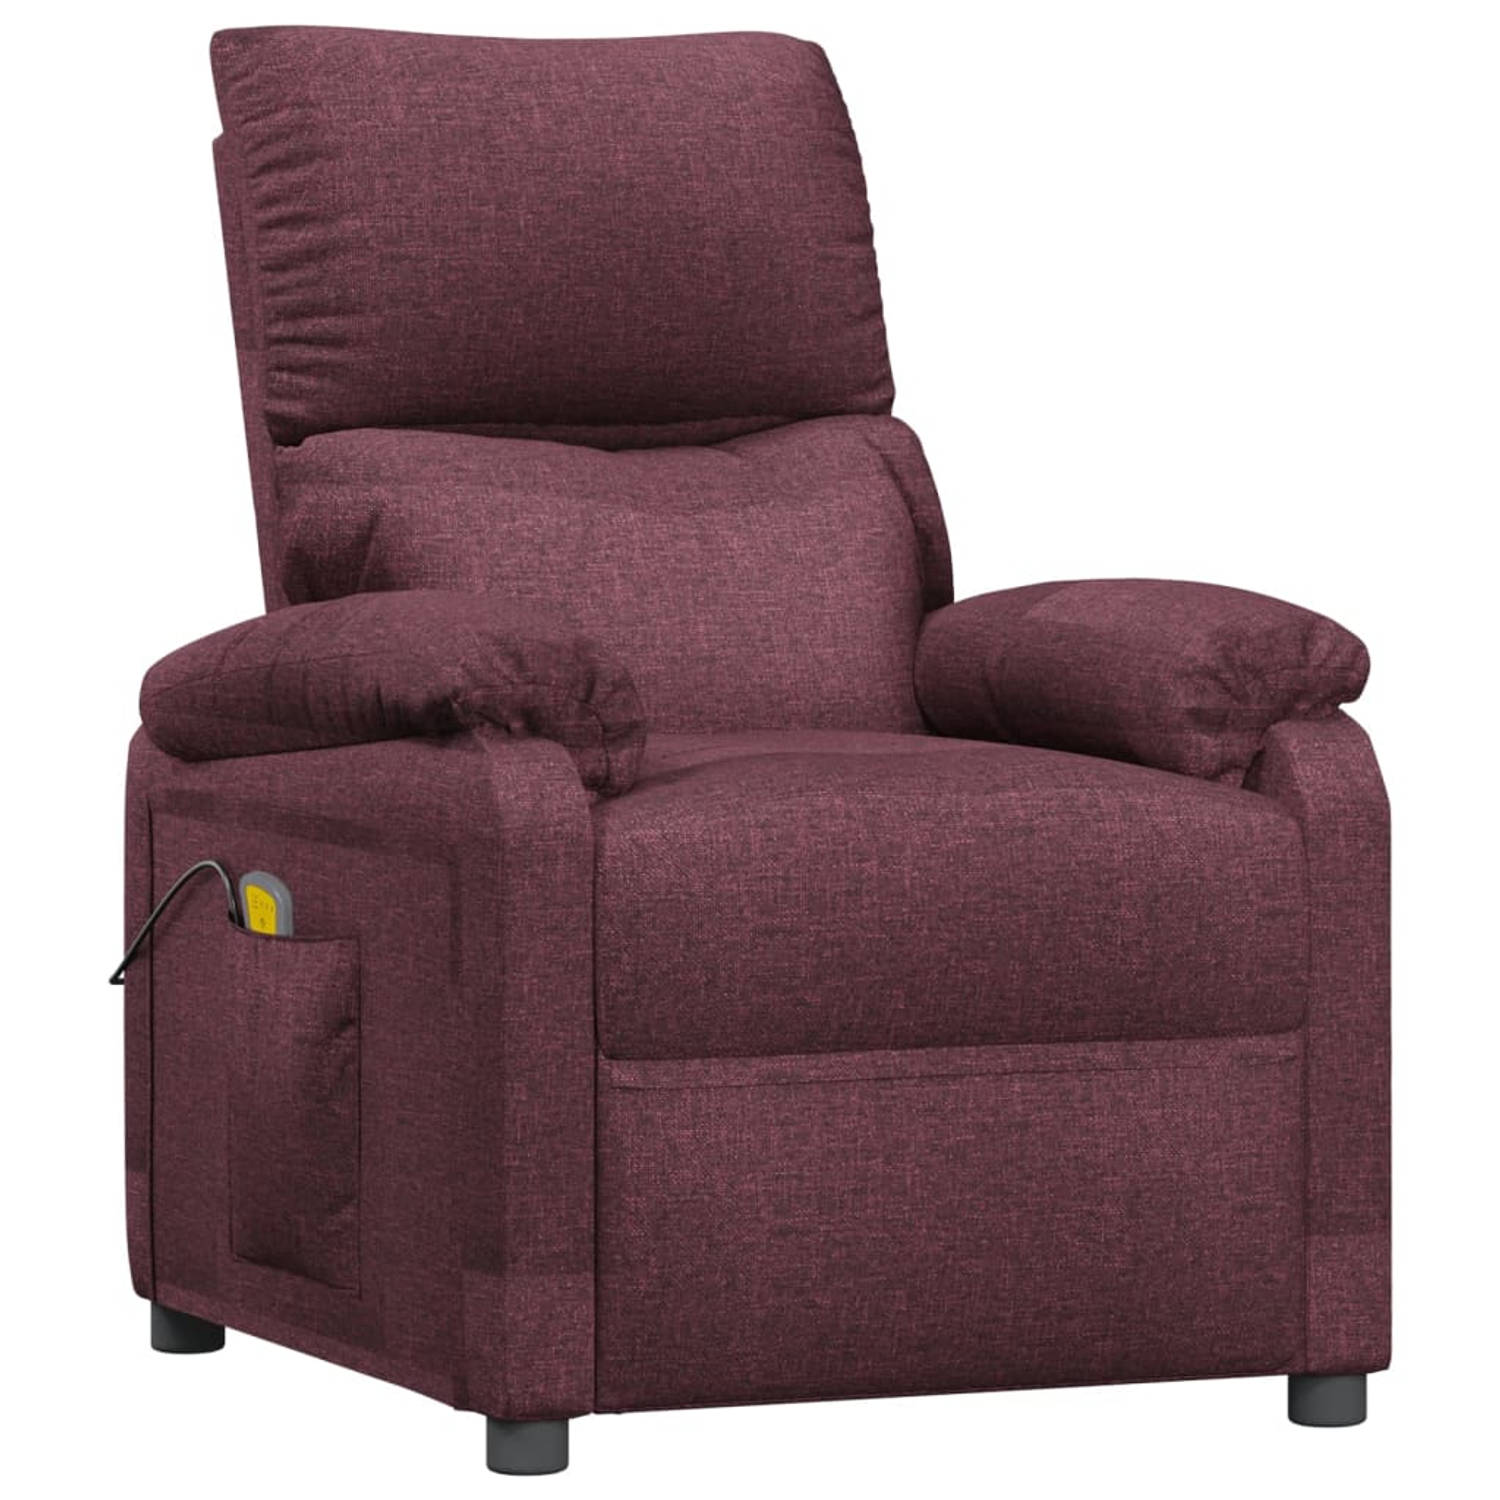 The Living Store Massagestoel stof paars - Fauteuil